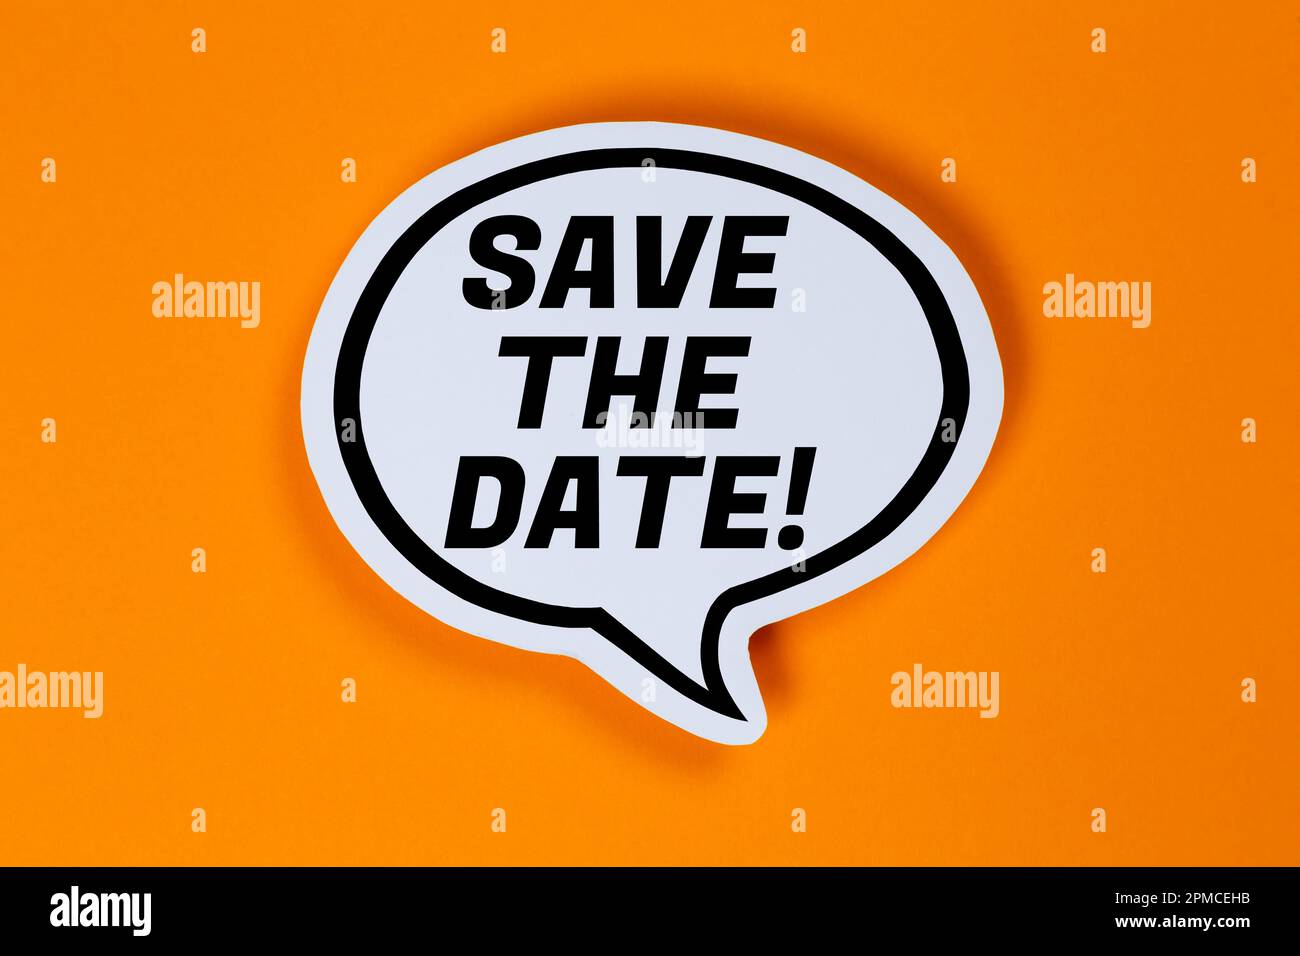 Save the date invitation message information in a speech bubble communication info concept Stock Photo